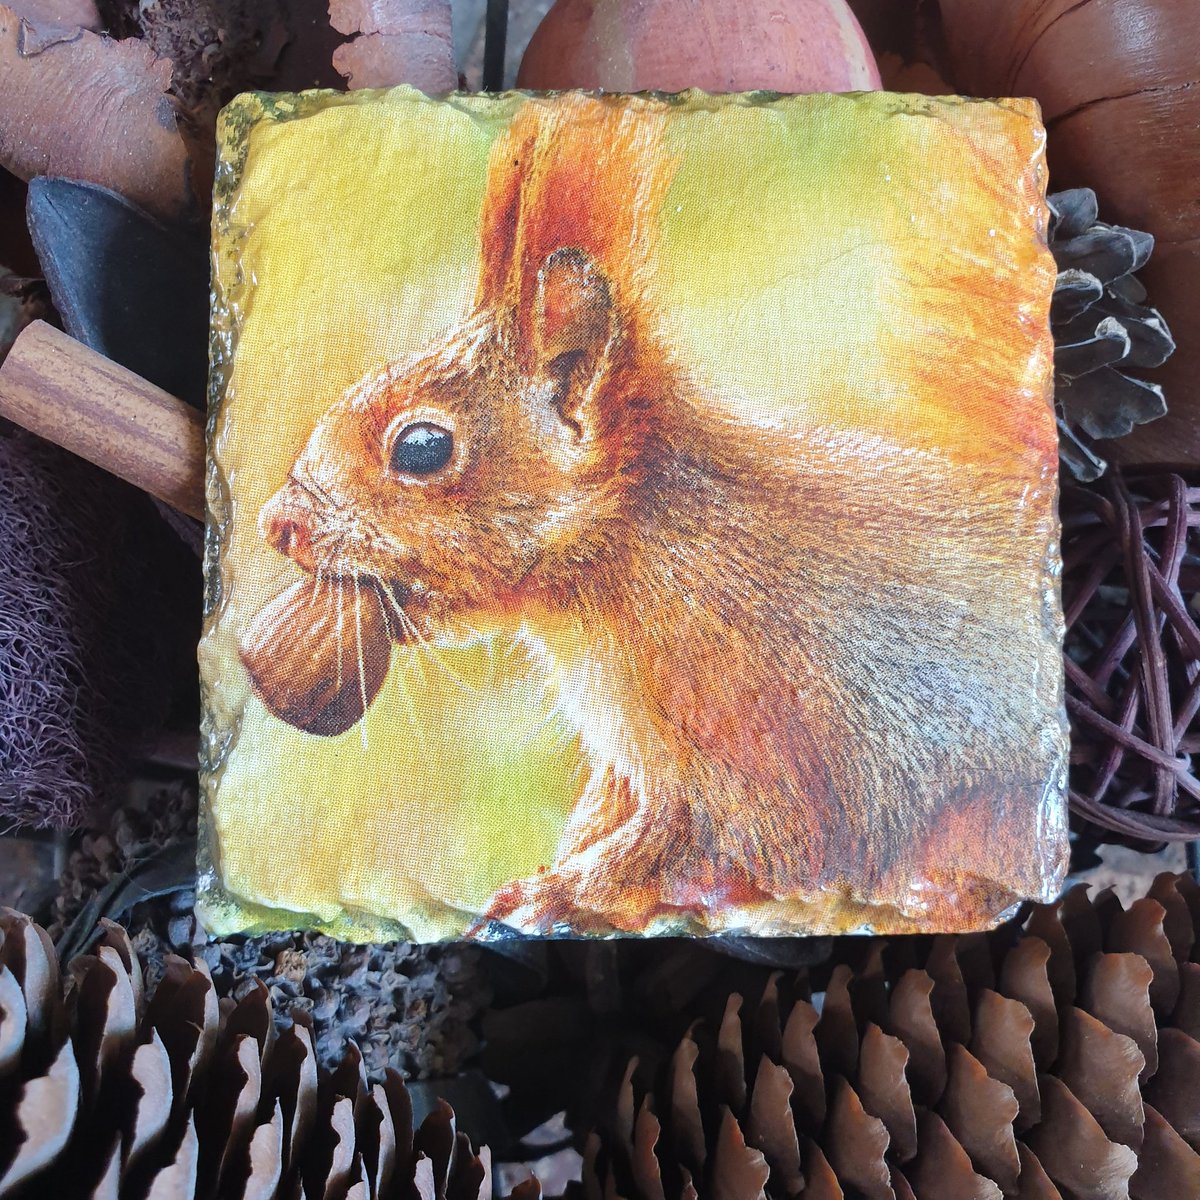 Hand painted and decoupaged slate coaster in a beautiful red squirrel design Just £3 etsy.com/shop/QueensOfC…
facebook.com/thequeensofcra…
#handmade #craft #Squirrels #slatecoaster #drinkscoasters #unique #nature #wildlife #forsale #decoupaged #giftidea #birthday #christmas